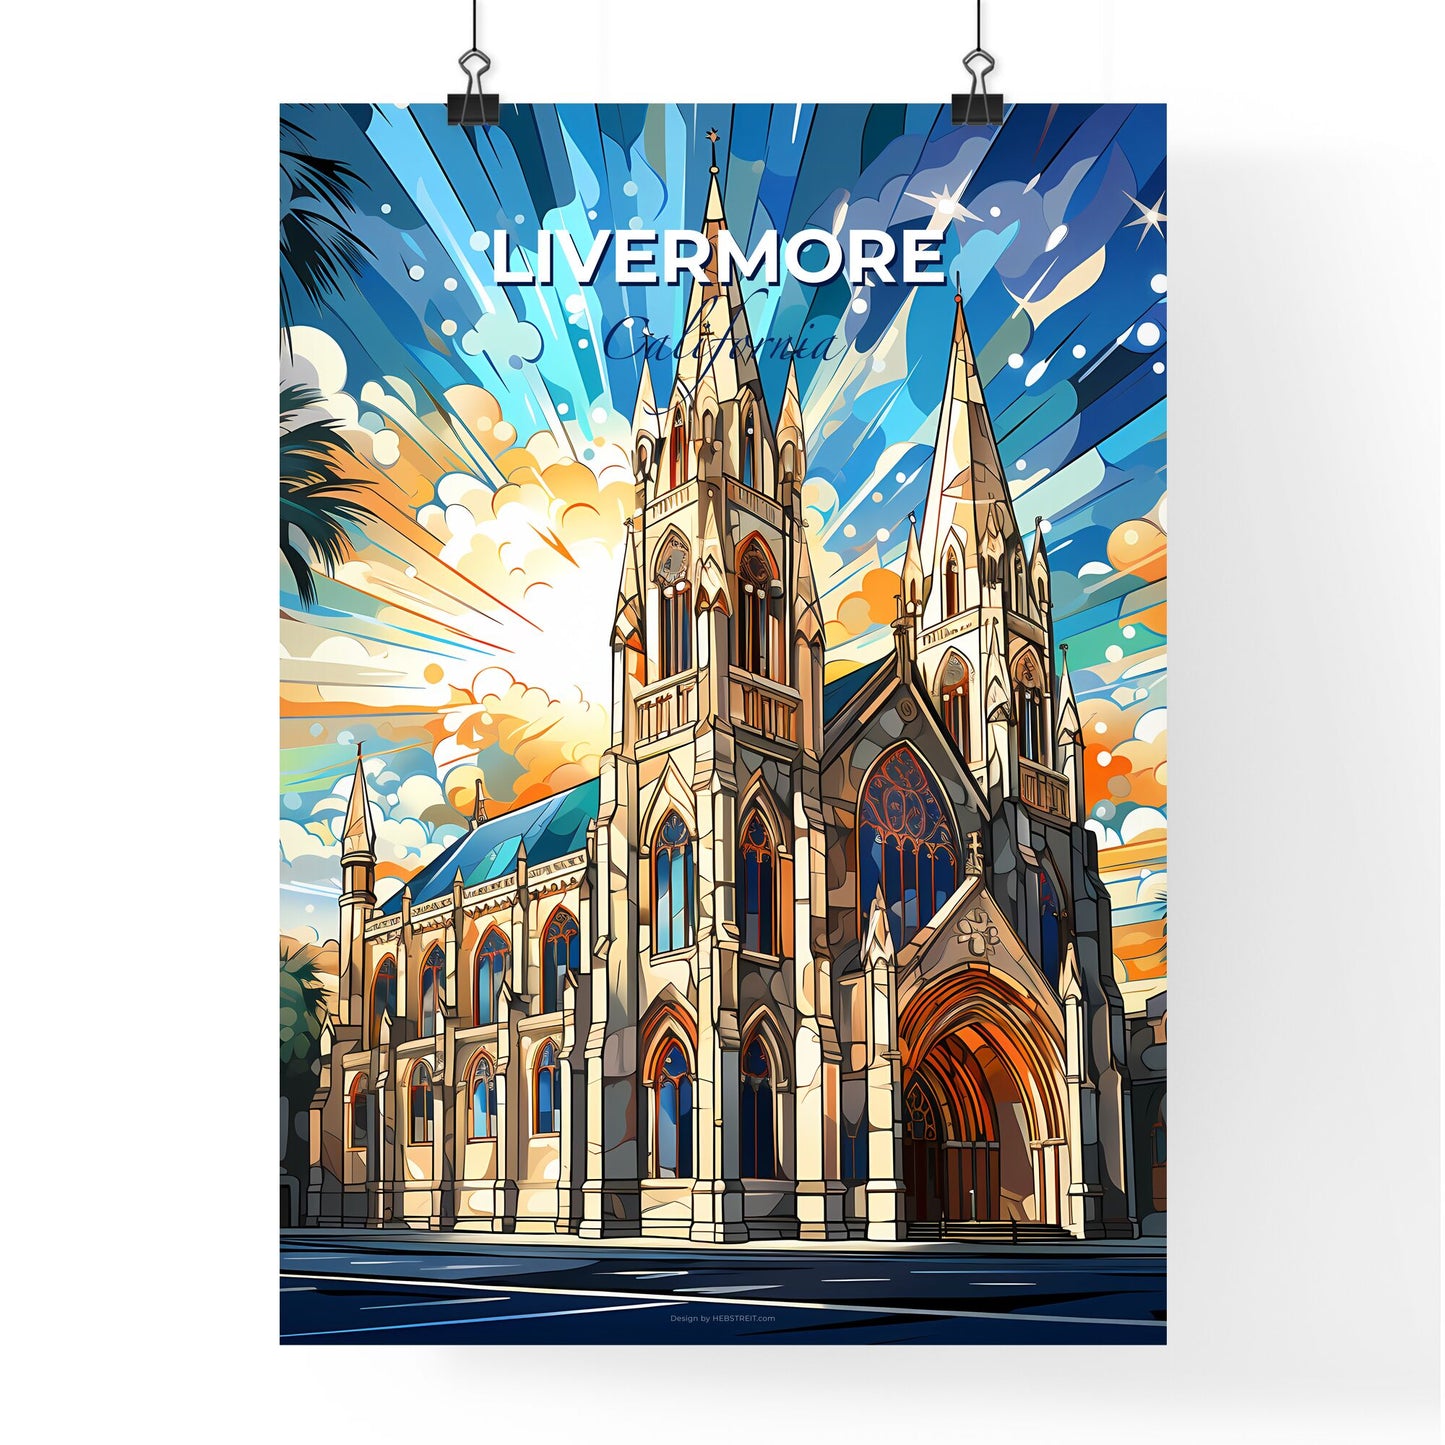 Livermore, California, A Poster of a building with a tower and a sunburst Default Title